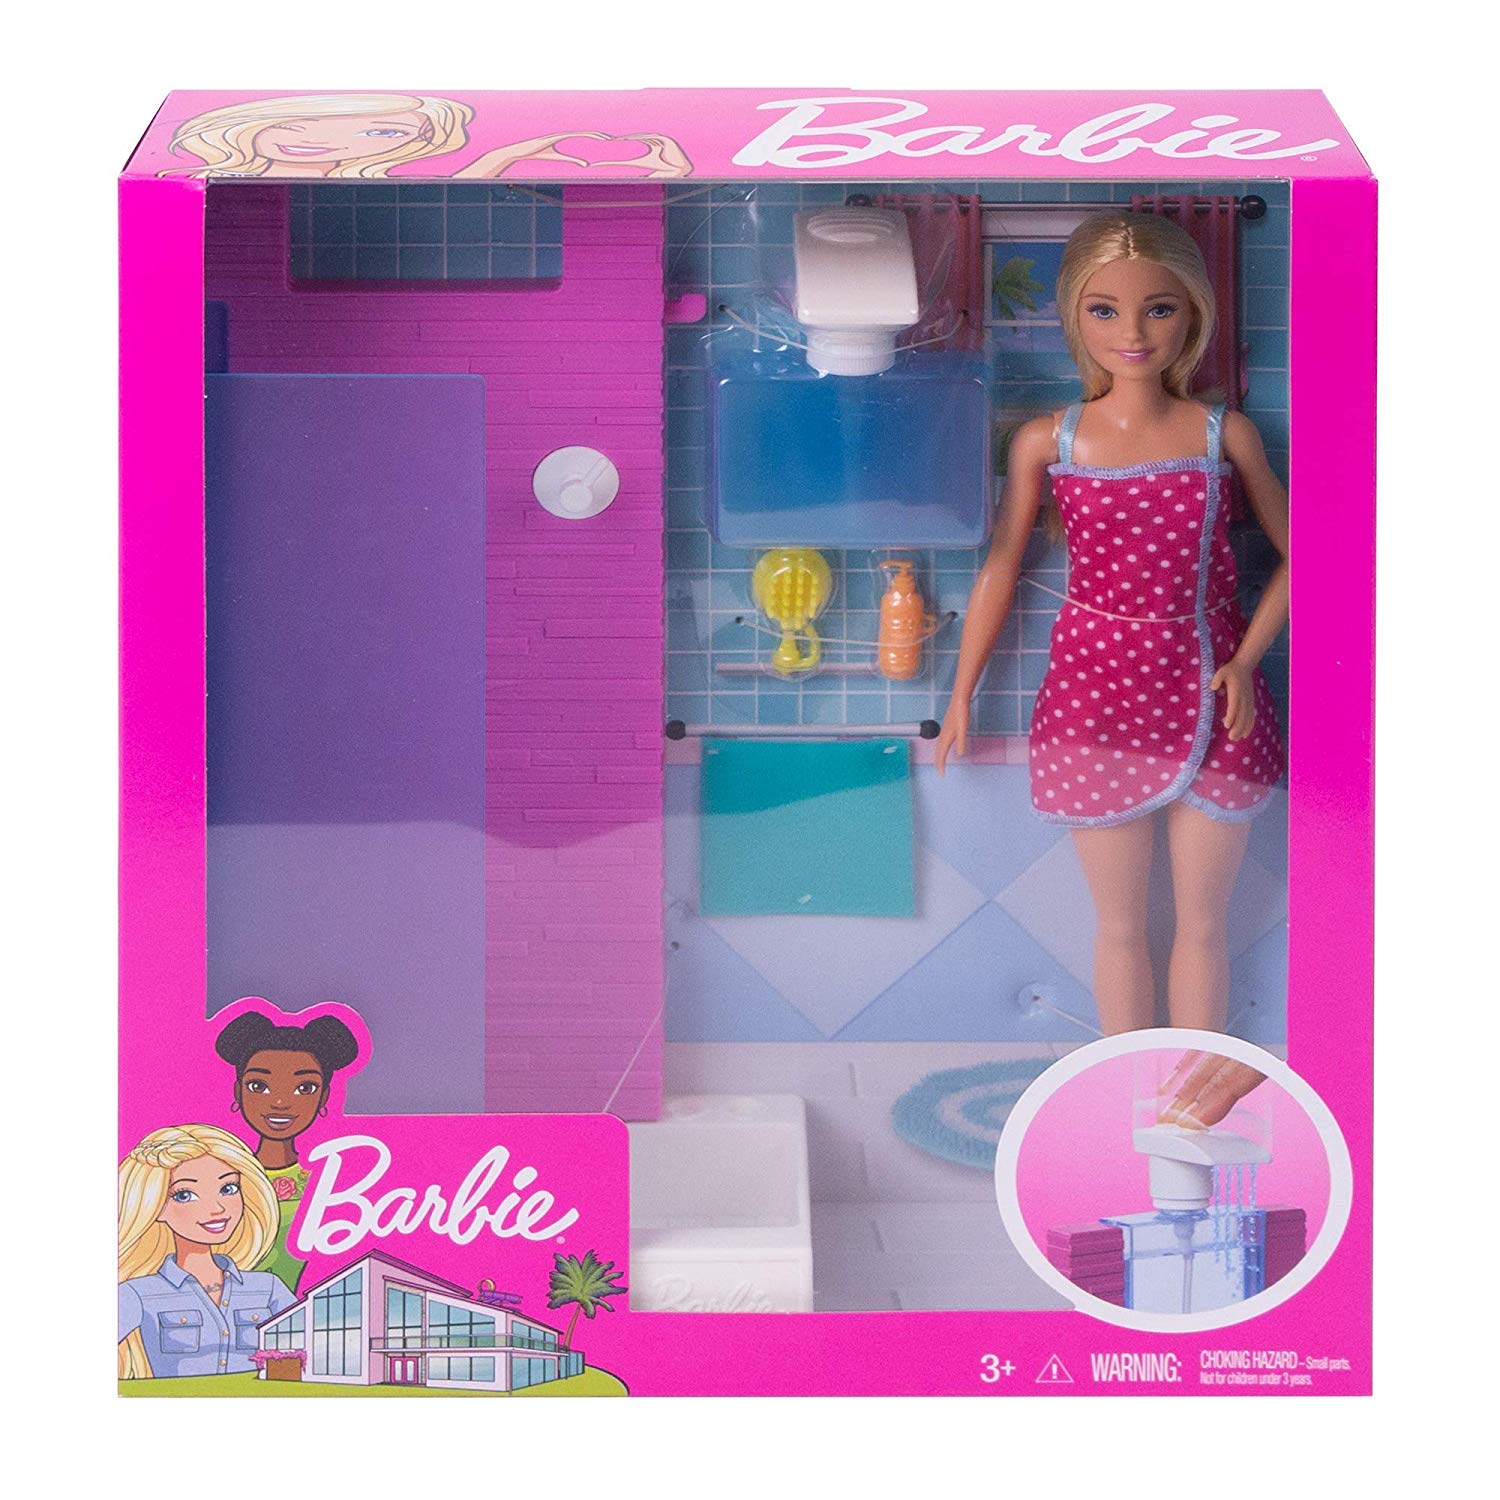 Barbie Doll Furniture Set Bathroom With Work Shower Three Bathroom Accessories Gift Set For Children From 3 To 7 Years Old Item Size 32 X 6 X 12cm Item Weight